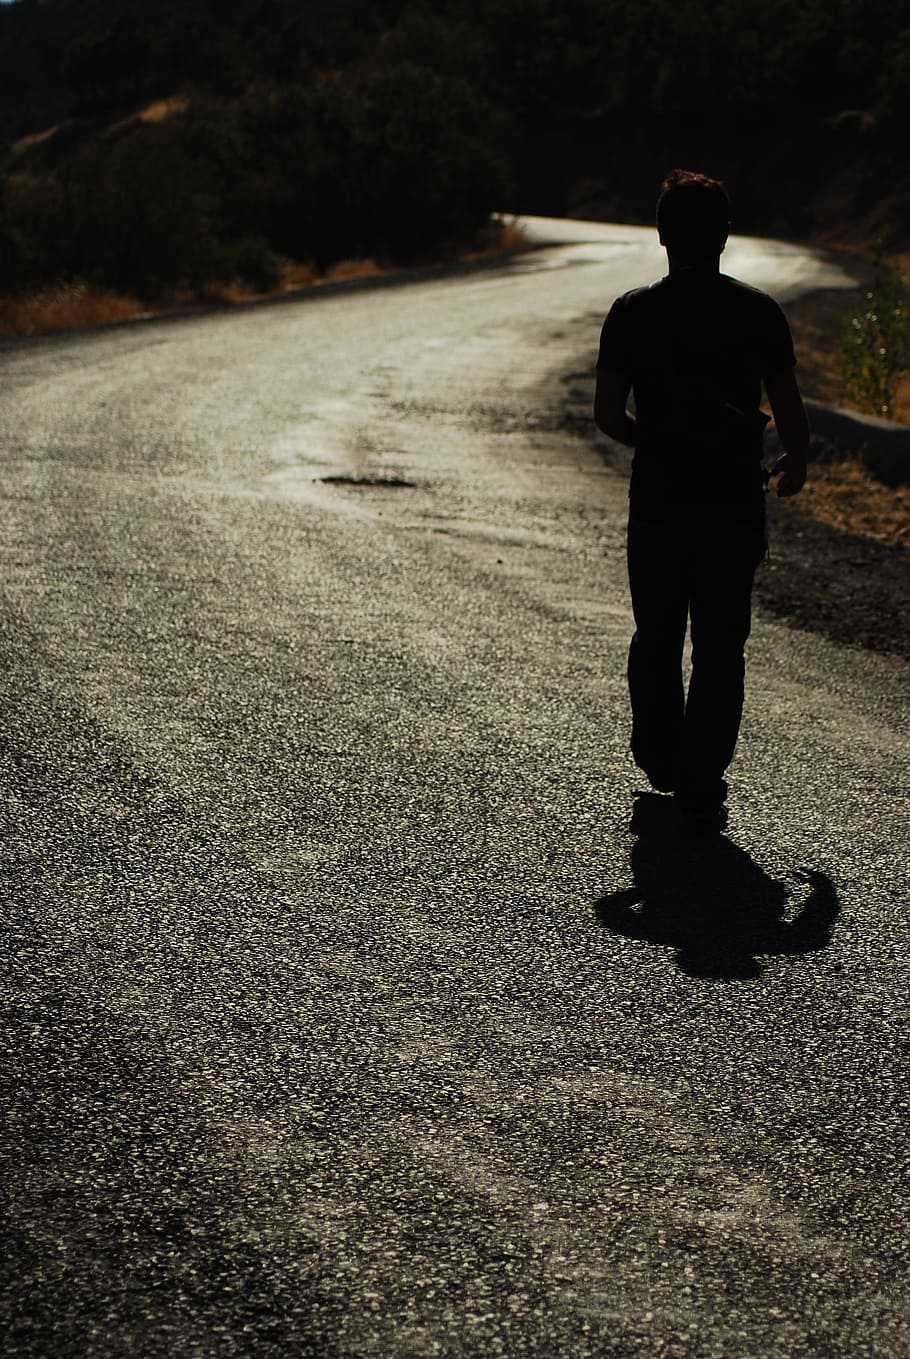 Human, Road, Walk, Male, Silhouette, path, shadow, men, one Person, outdoors